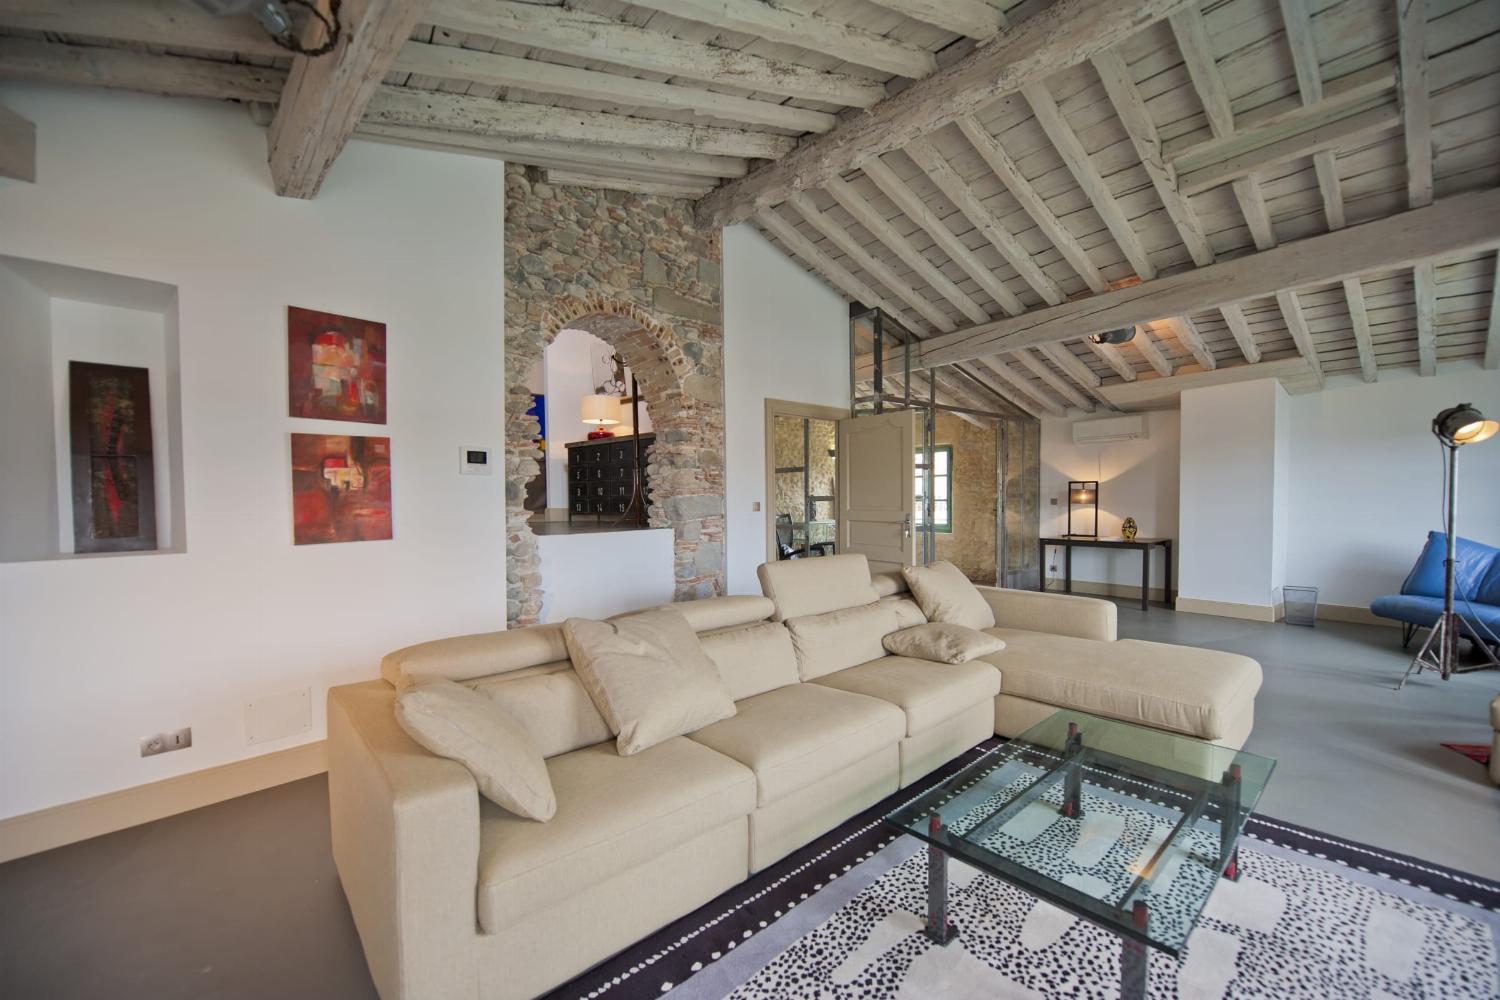 Living room | Rental home in South of France